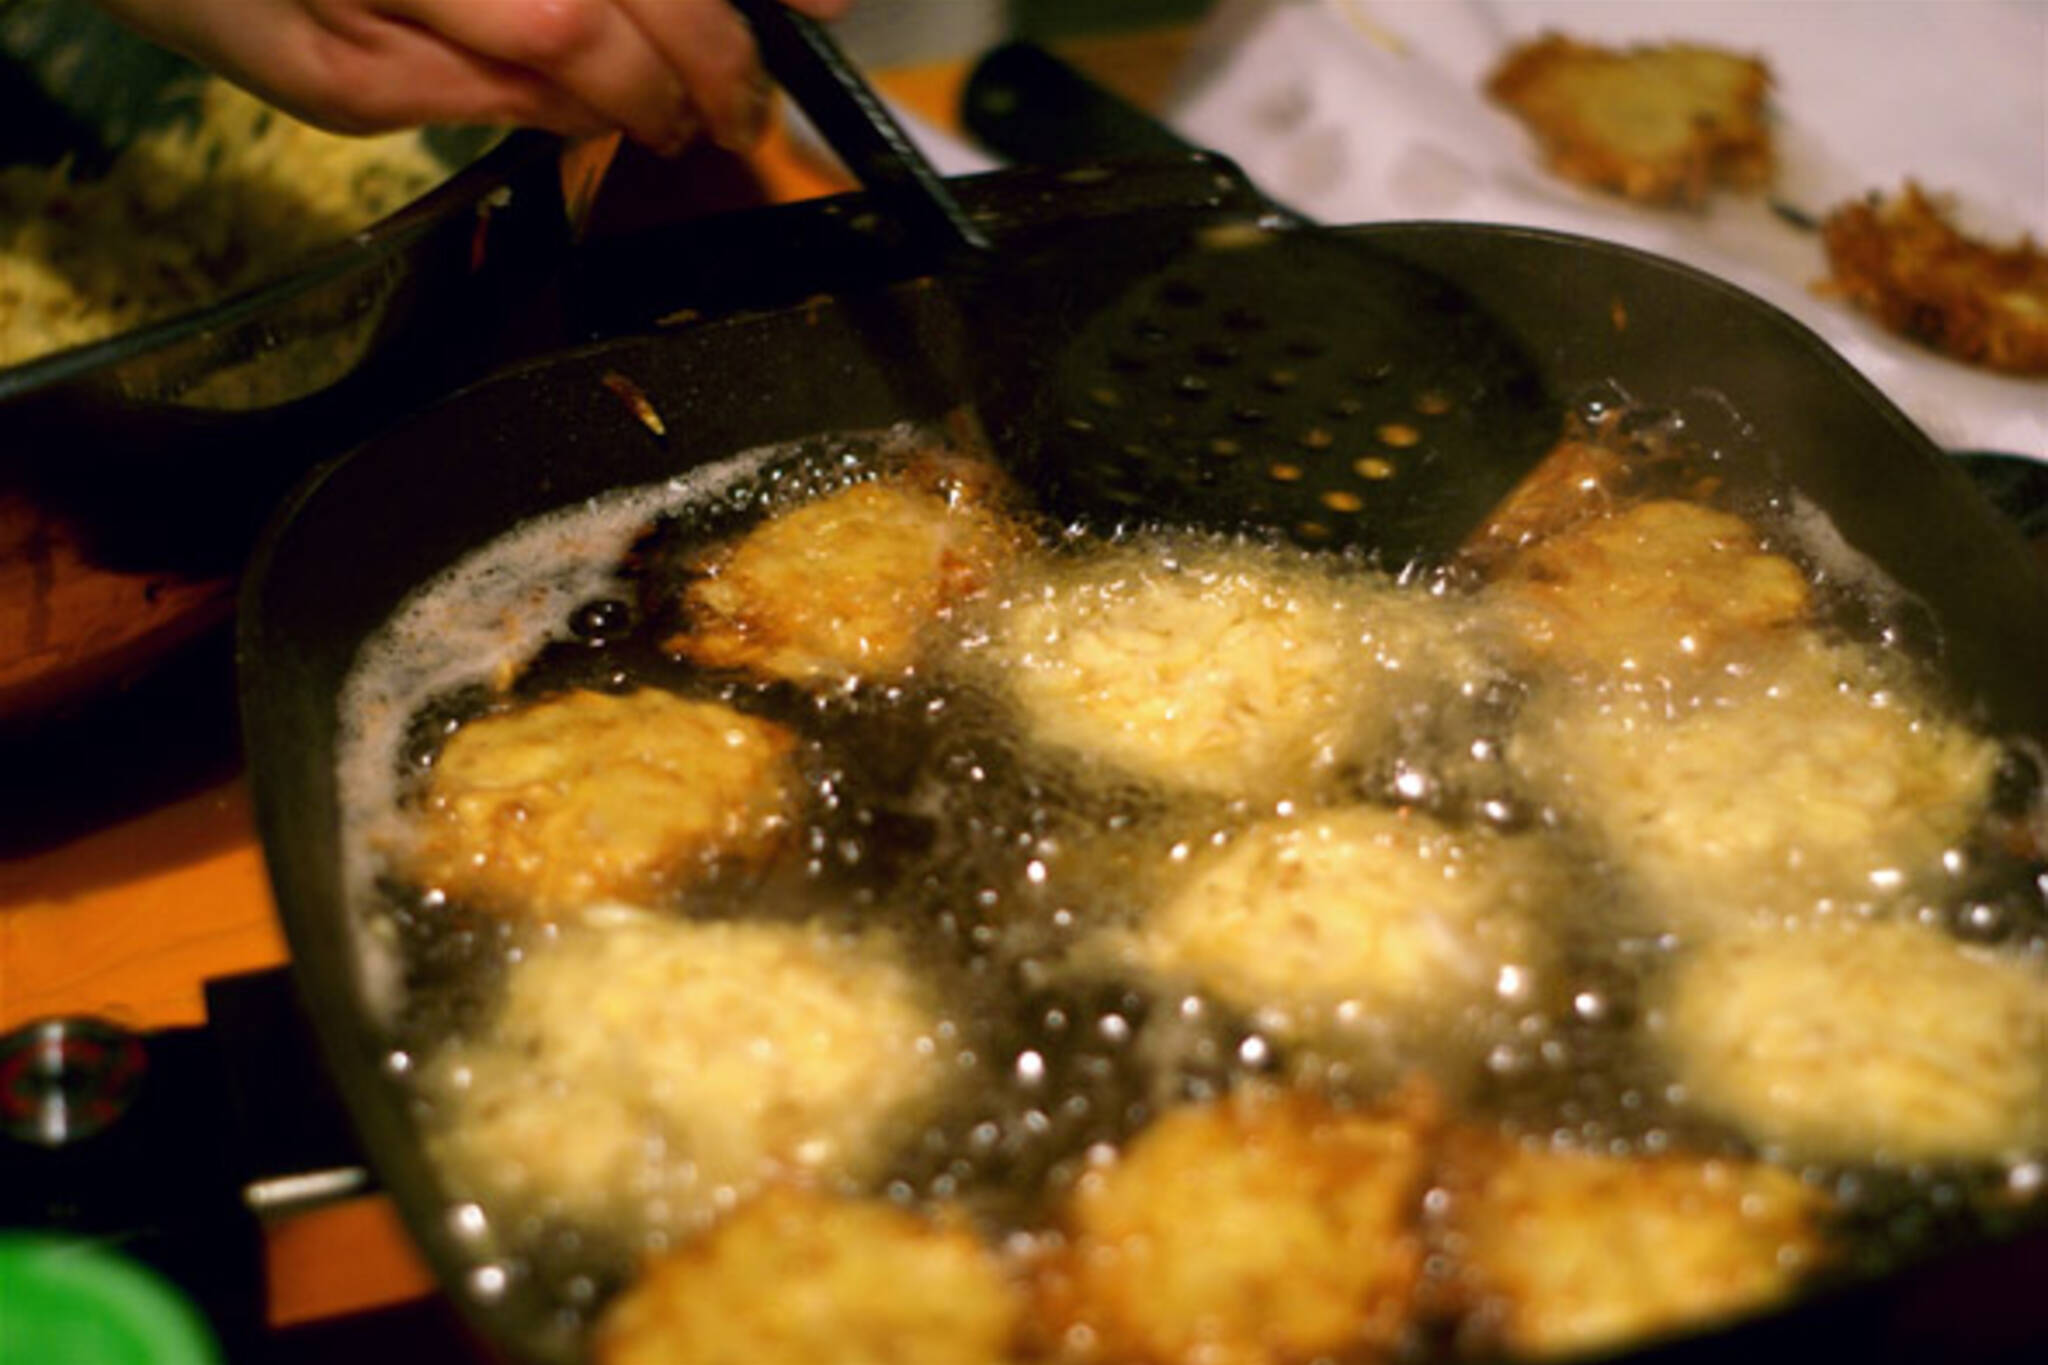 Latkes are consumed during the Jewish festival of Hanukkah